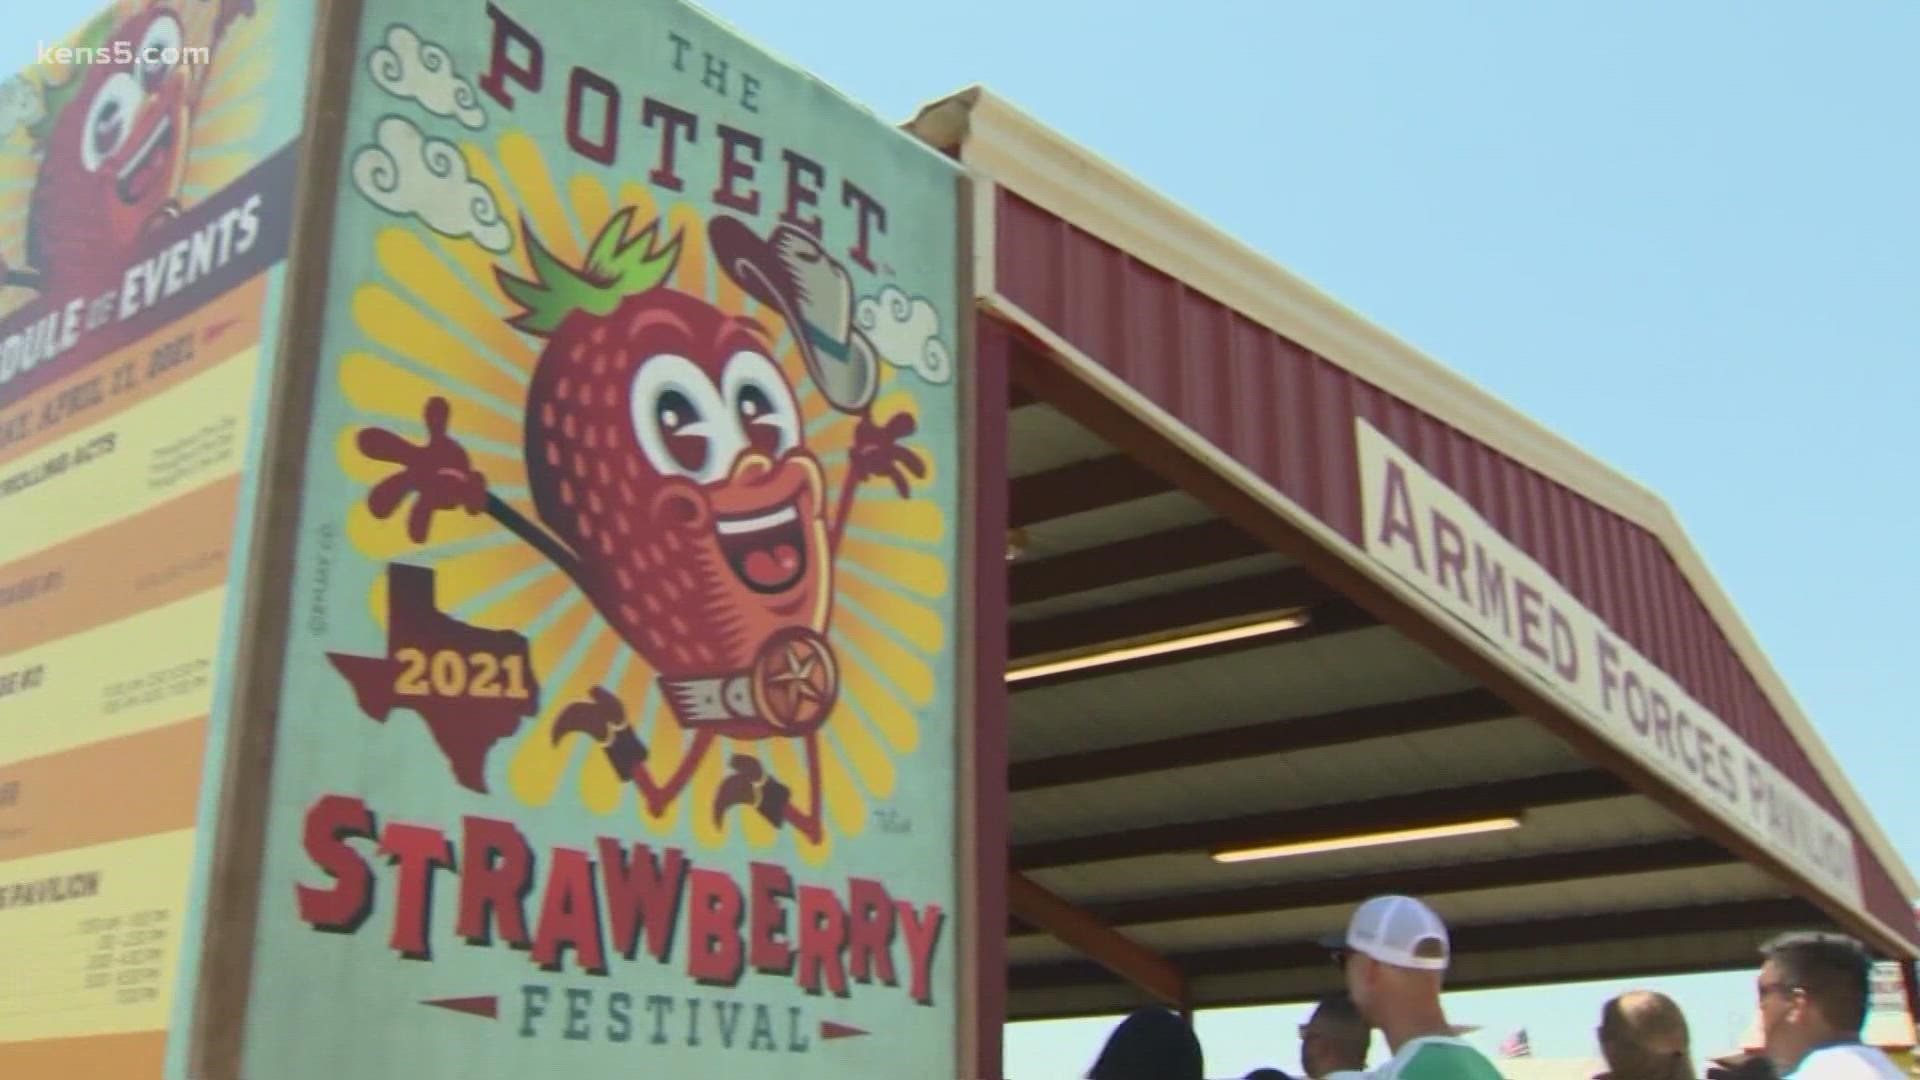 There will be plenty of musical acts, but the real headliners are of course the strawberries.